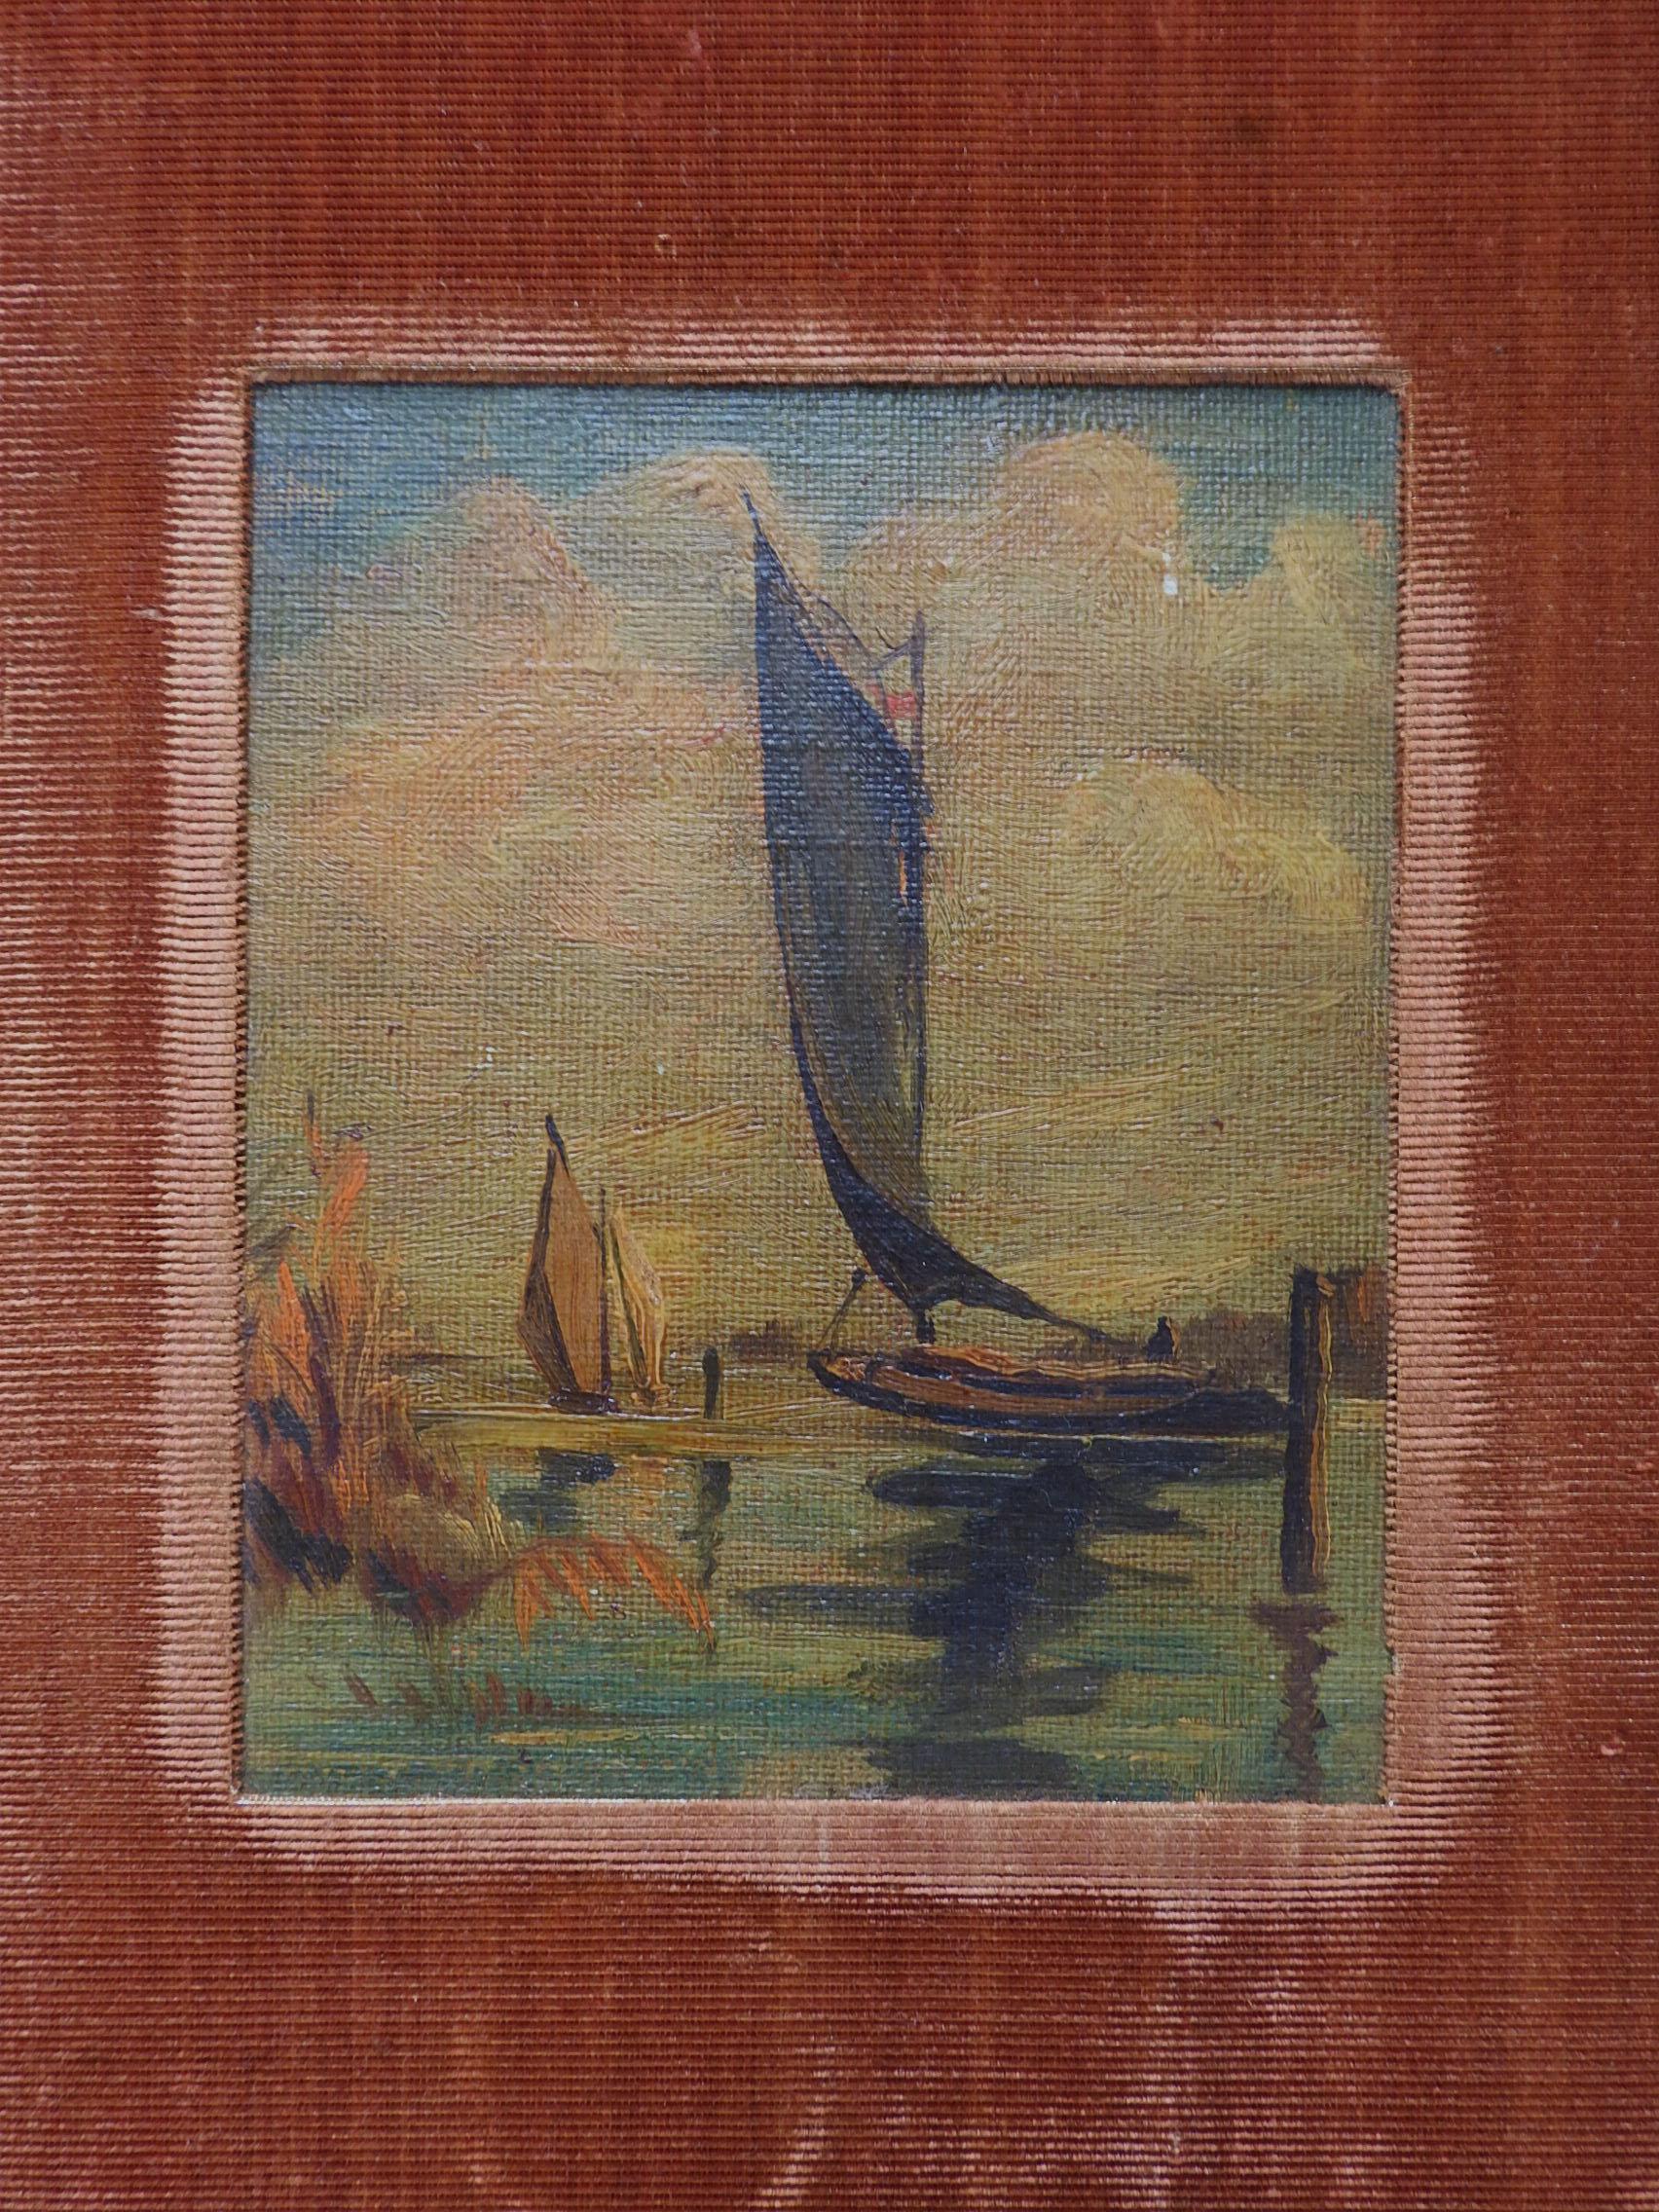 Arts and Crafts Antique Velvet Album With Sailboat Painting Cover